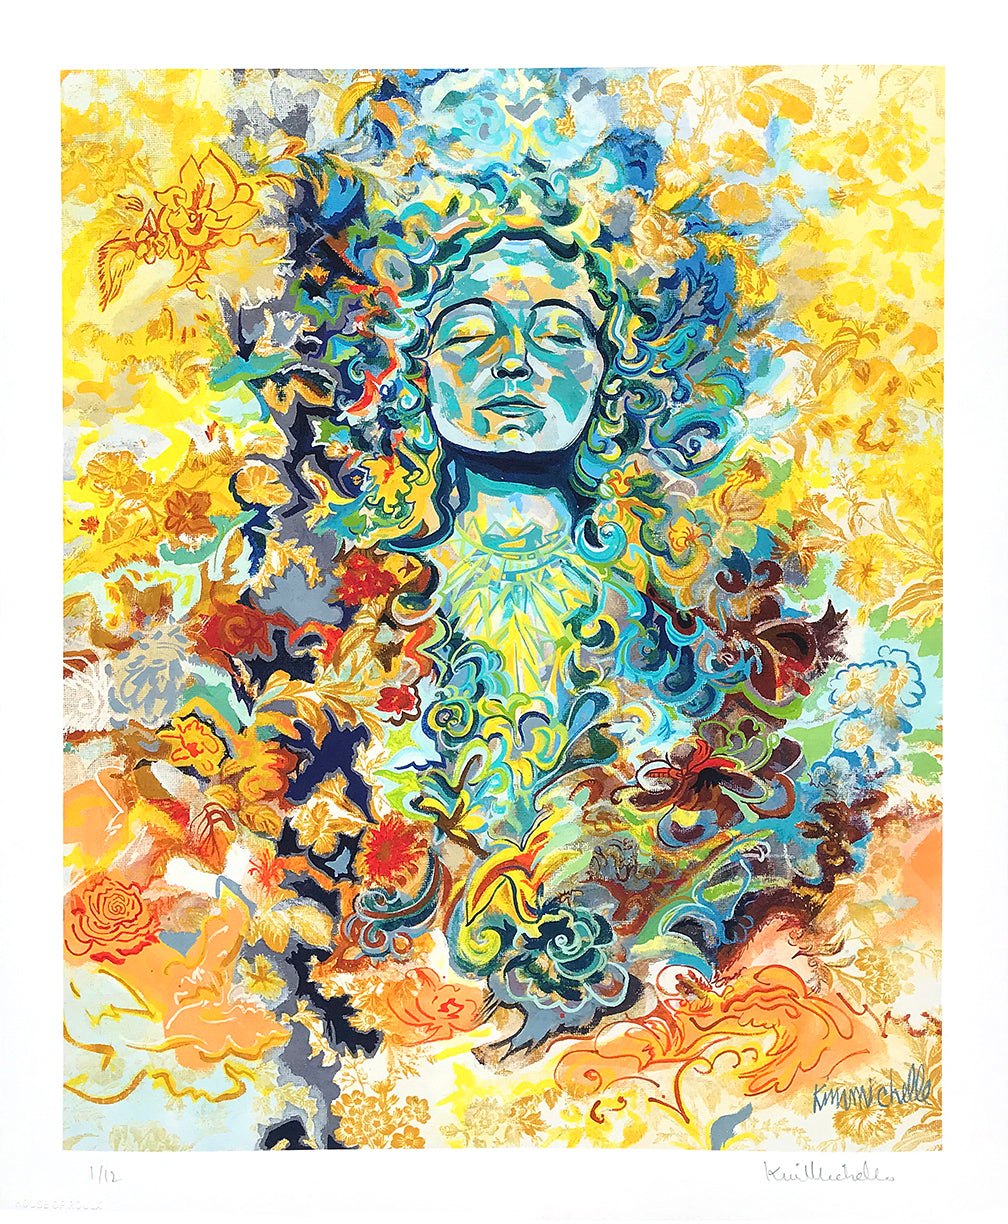 Kim Michelle &quot;Parvati Goddess of Love&quot; - Archival Print, Limited Edition of 12 - 14 x 17&quot;